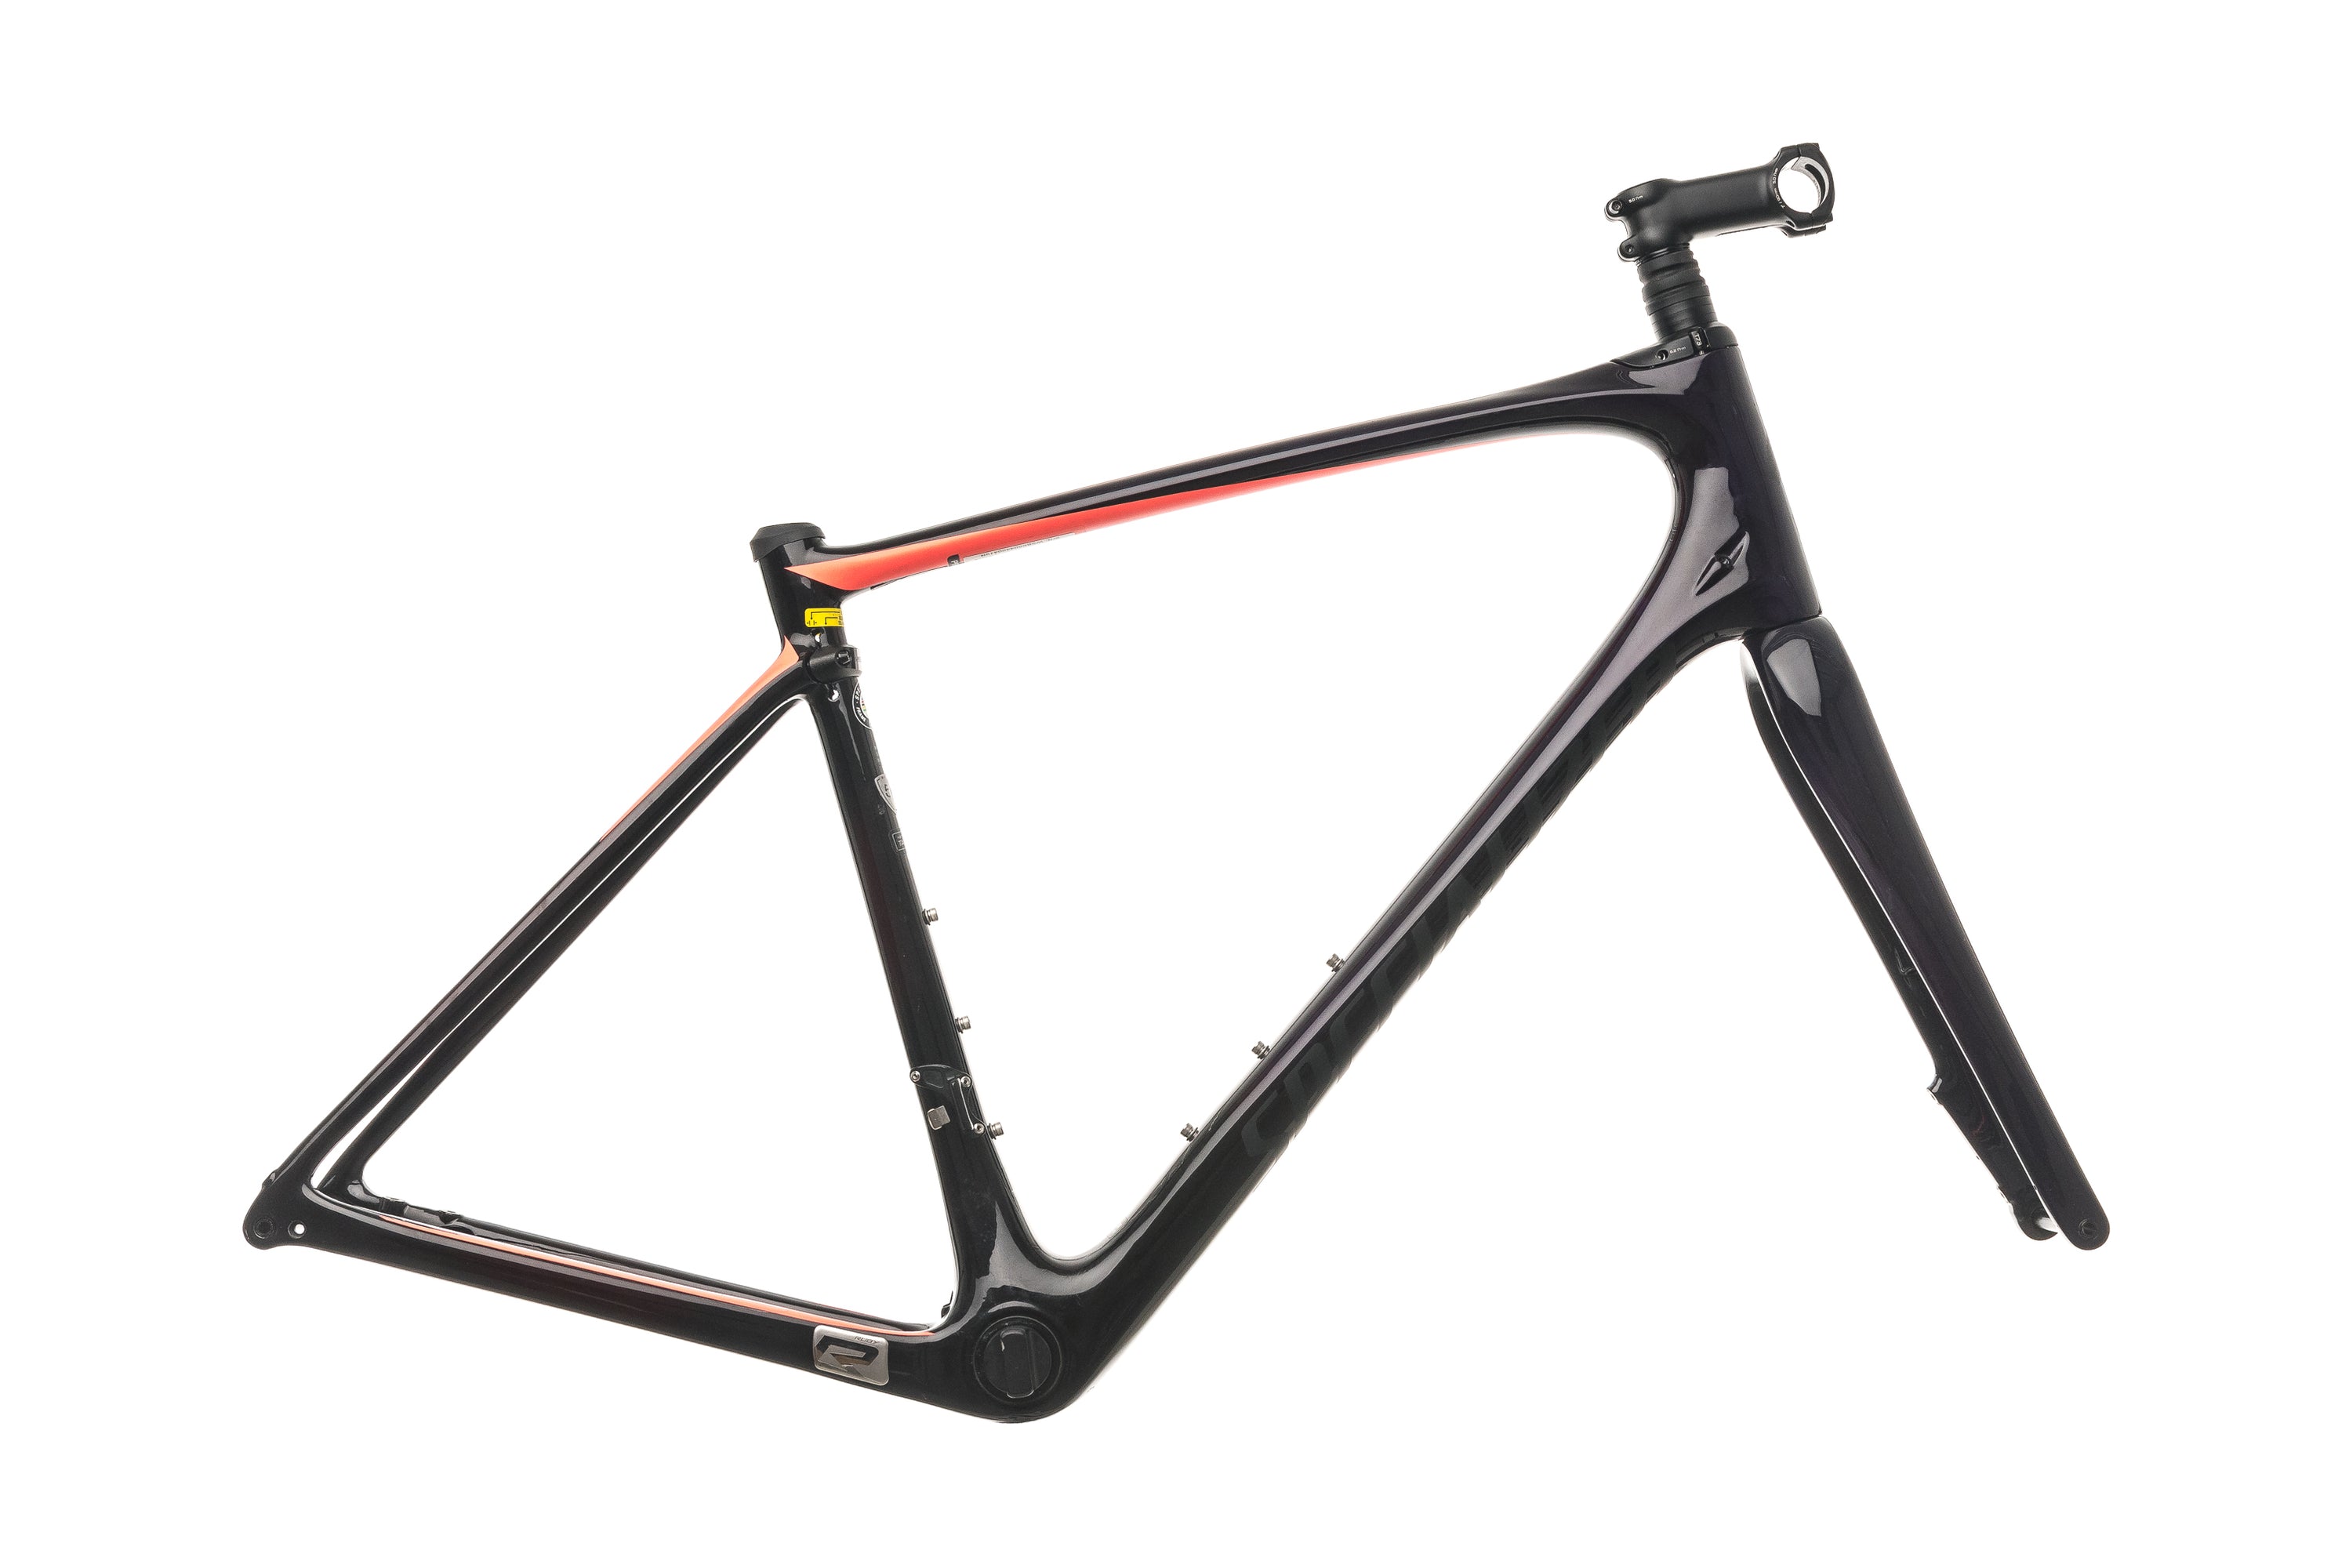 Specialized Ruby Comp Disc Womens 56cm Frameset - 2019 drive side